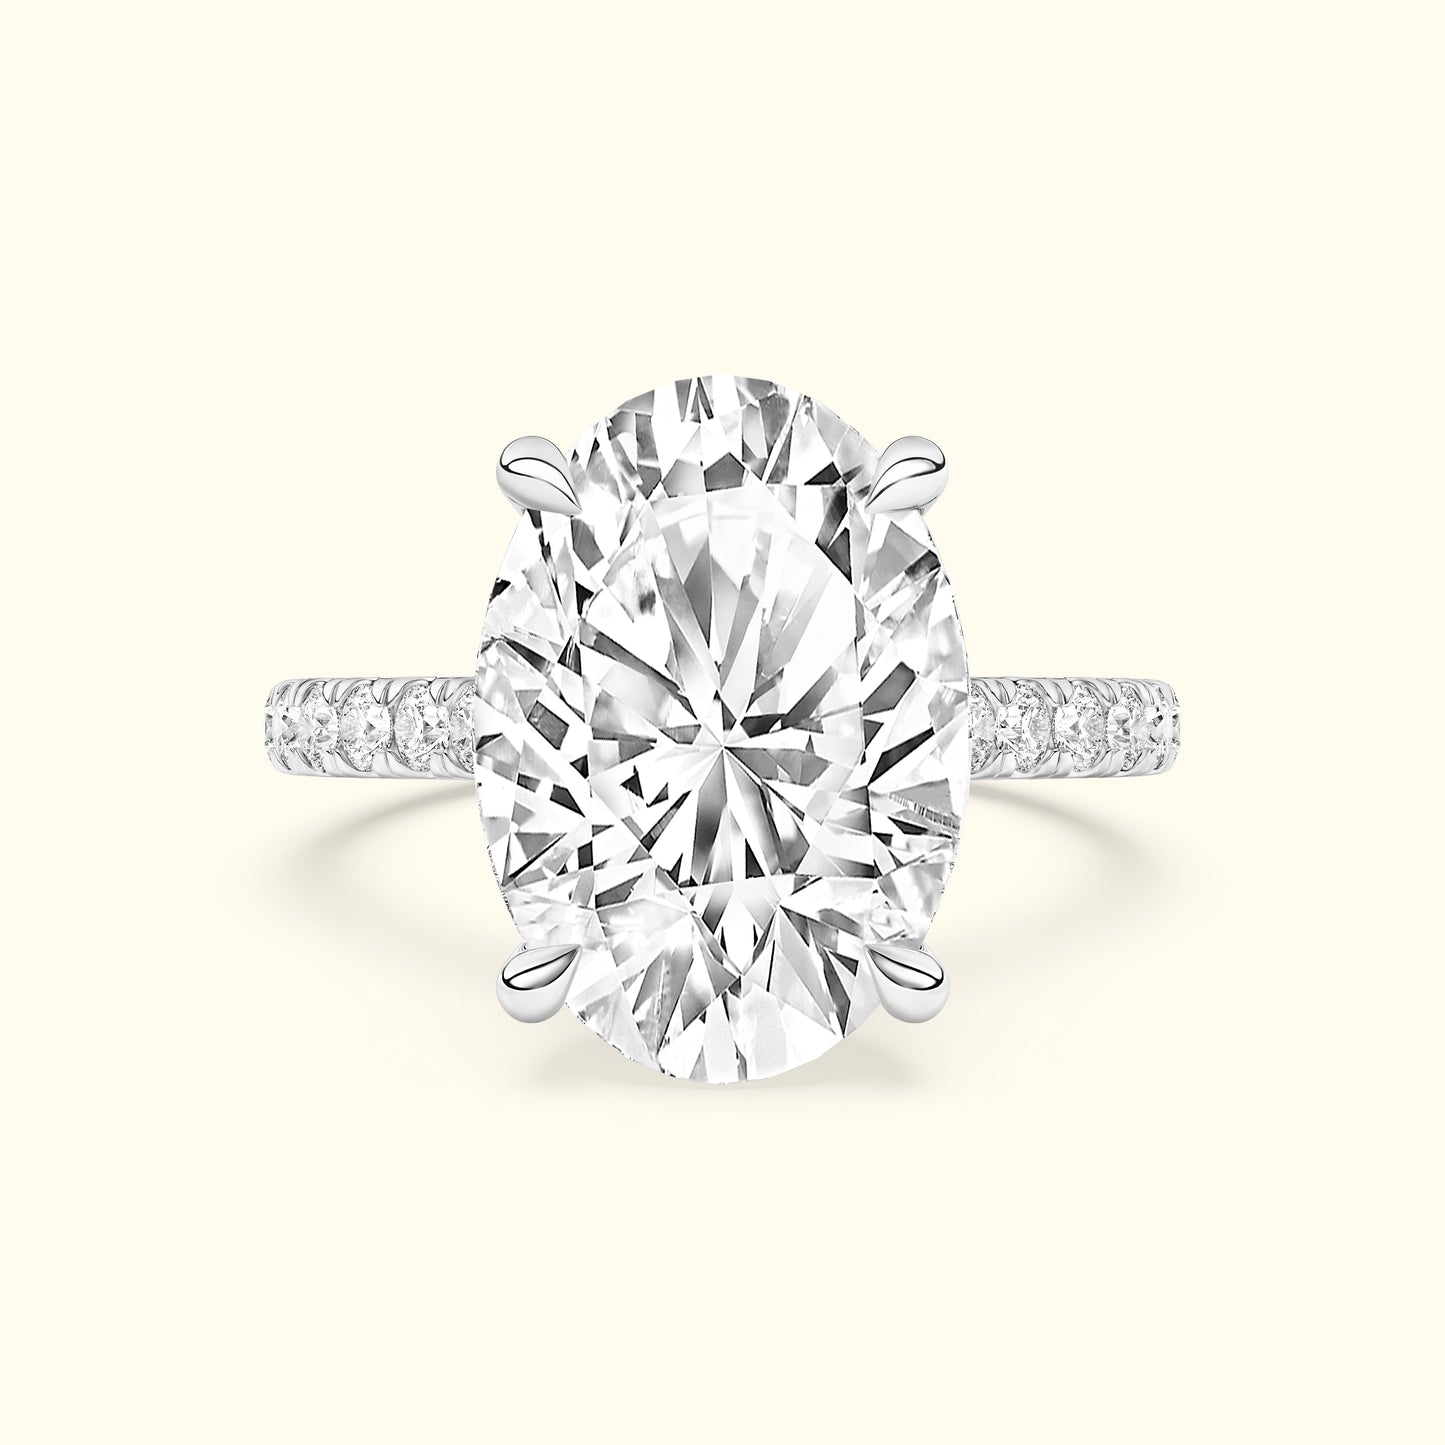 'Elizabeth' Ring with 5.04ct Oval Diamond